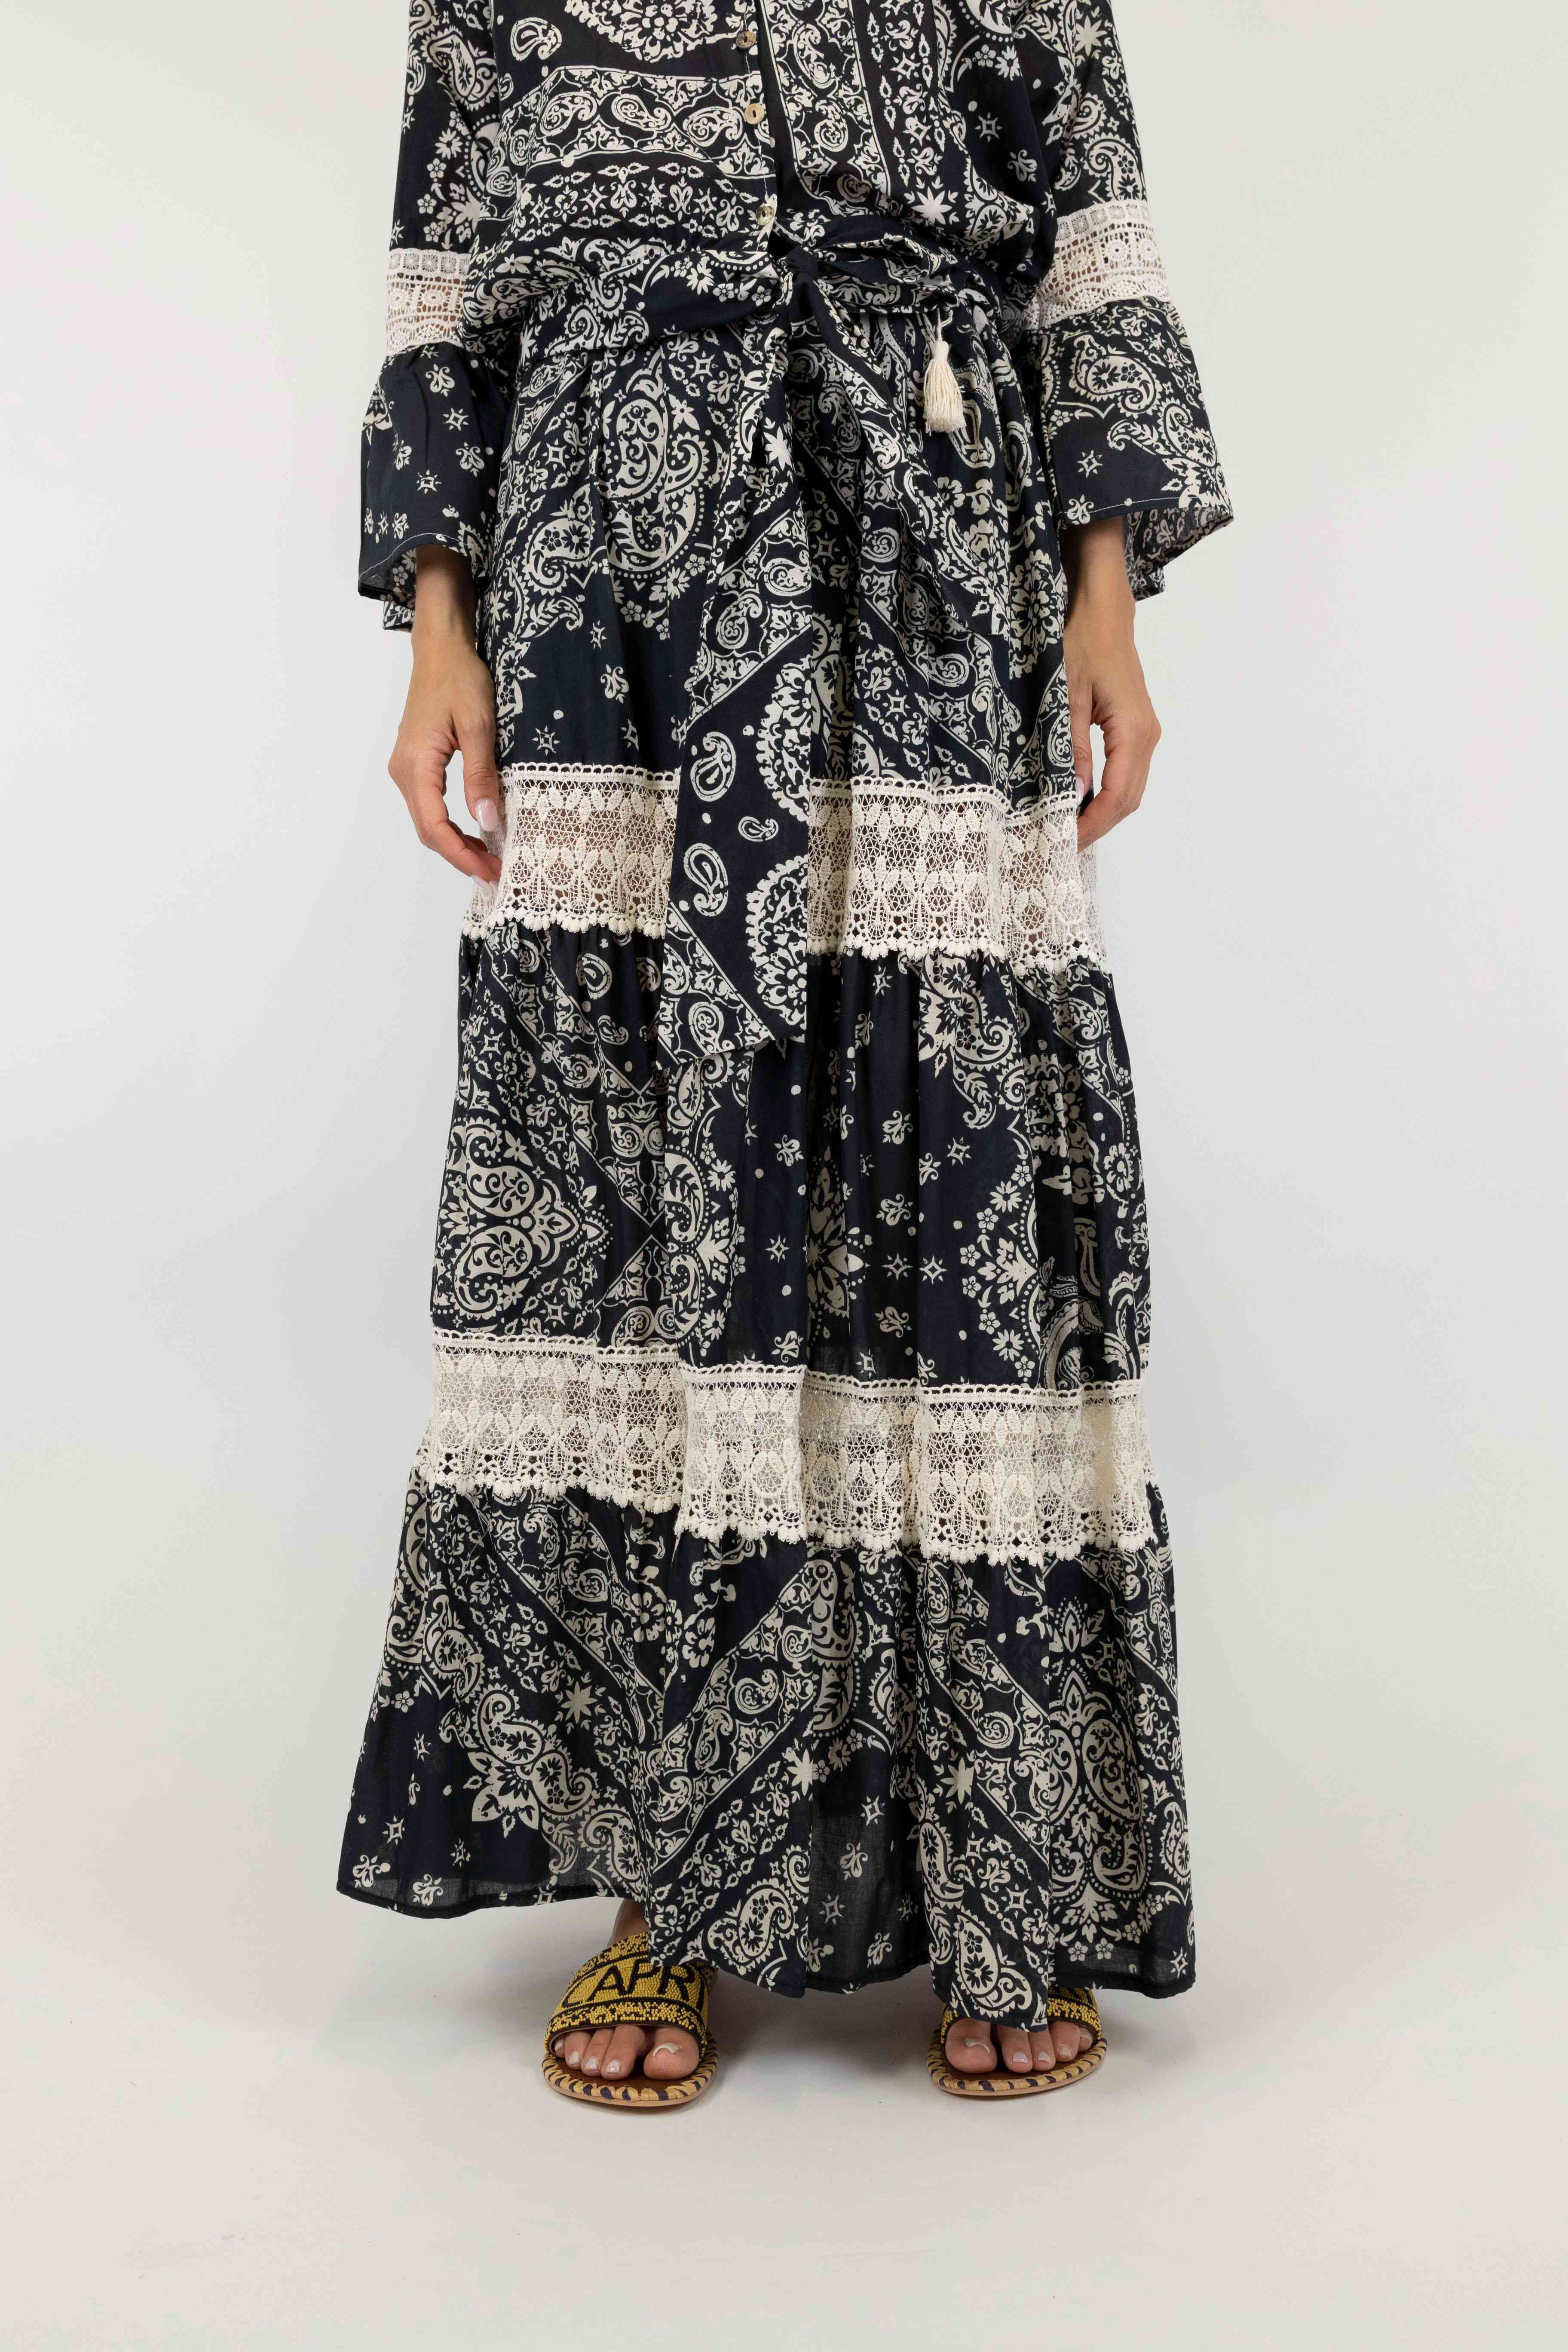 Tension in - Ethnic patterned skirt with drawstring and lace flounces